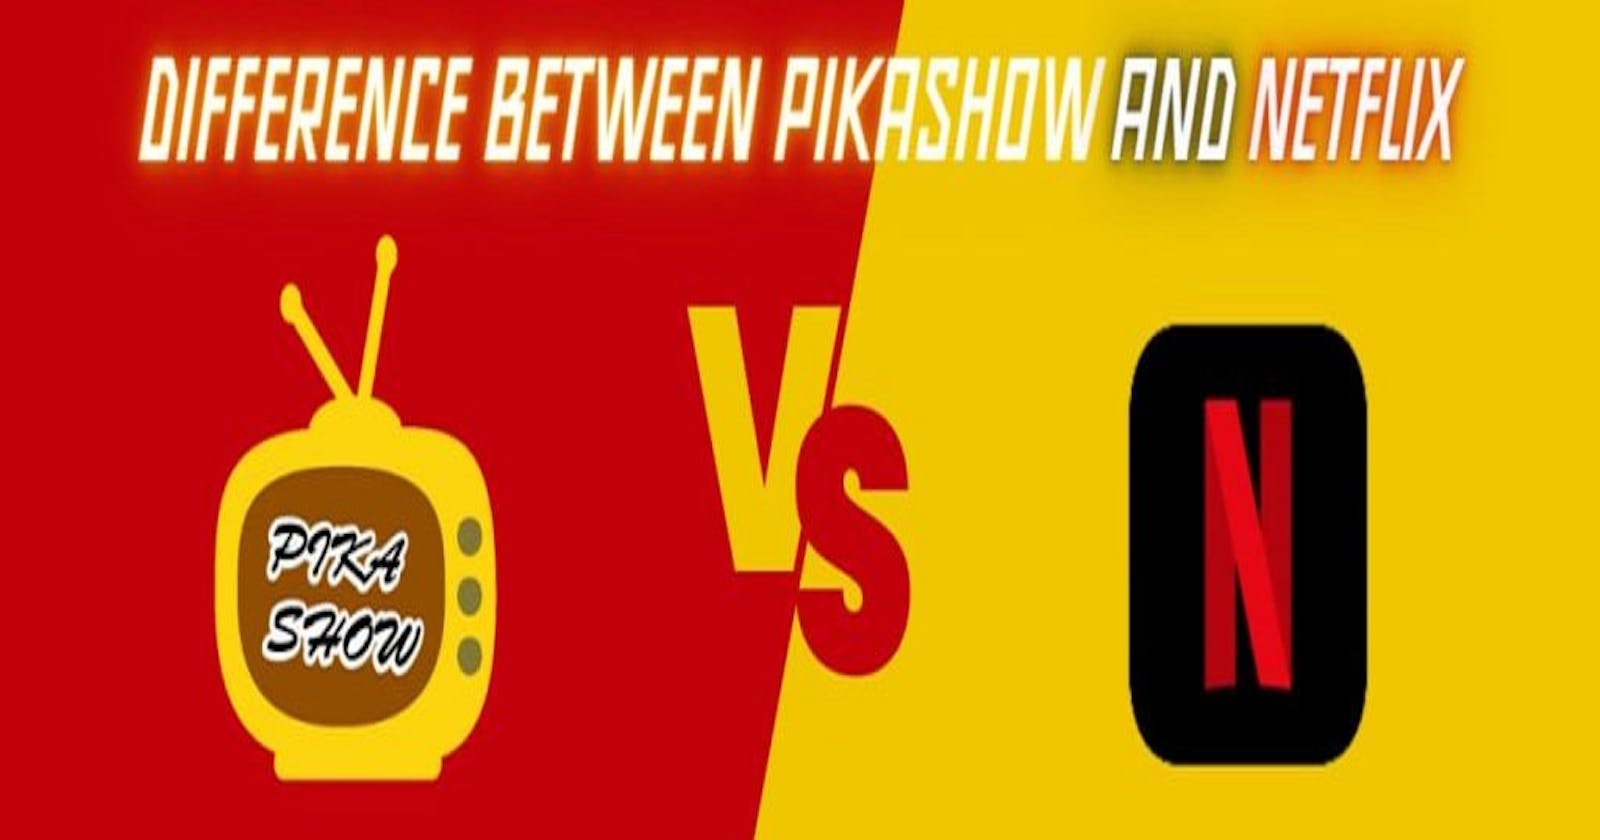 Difference between Pikashow and Netflix